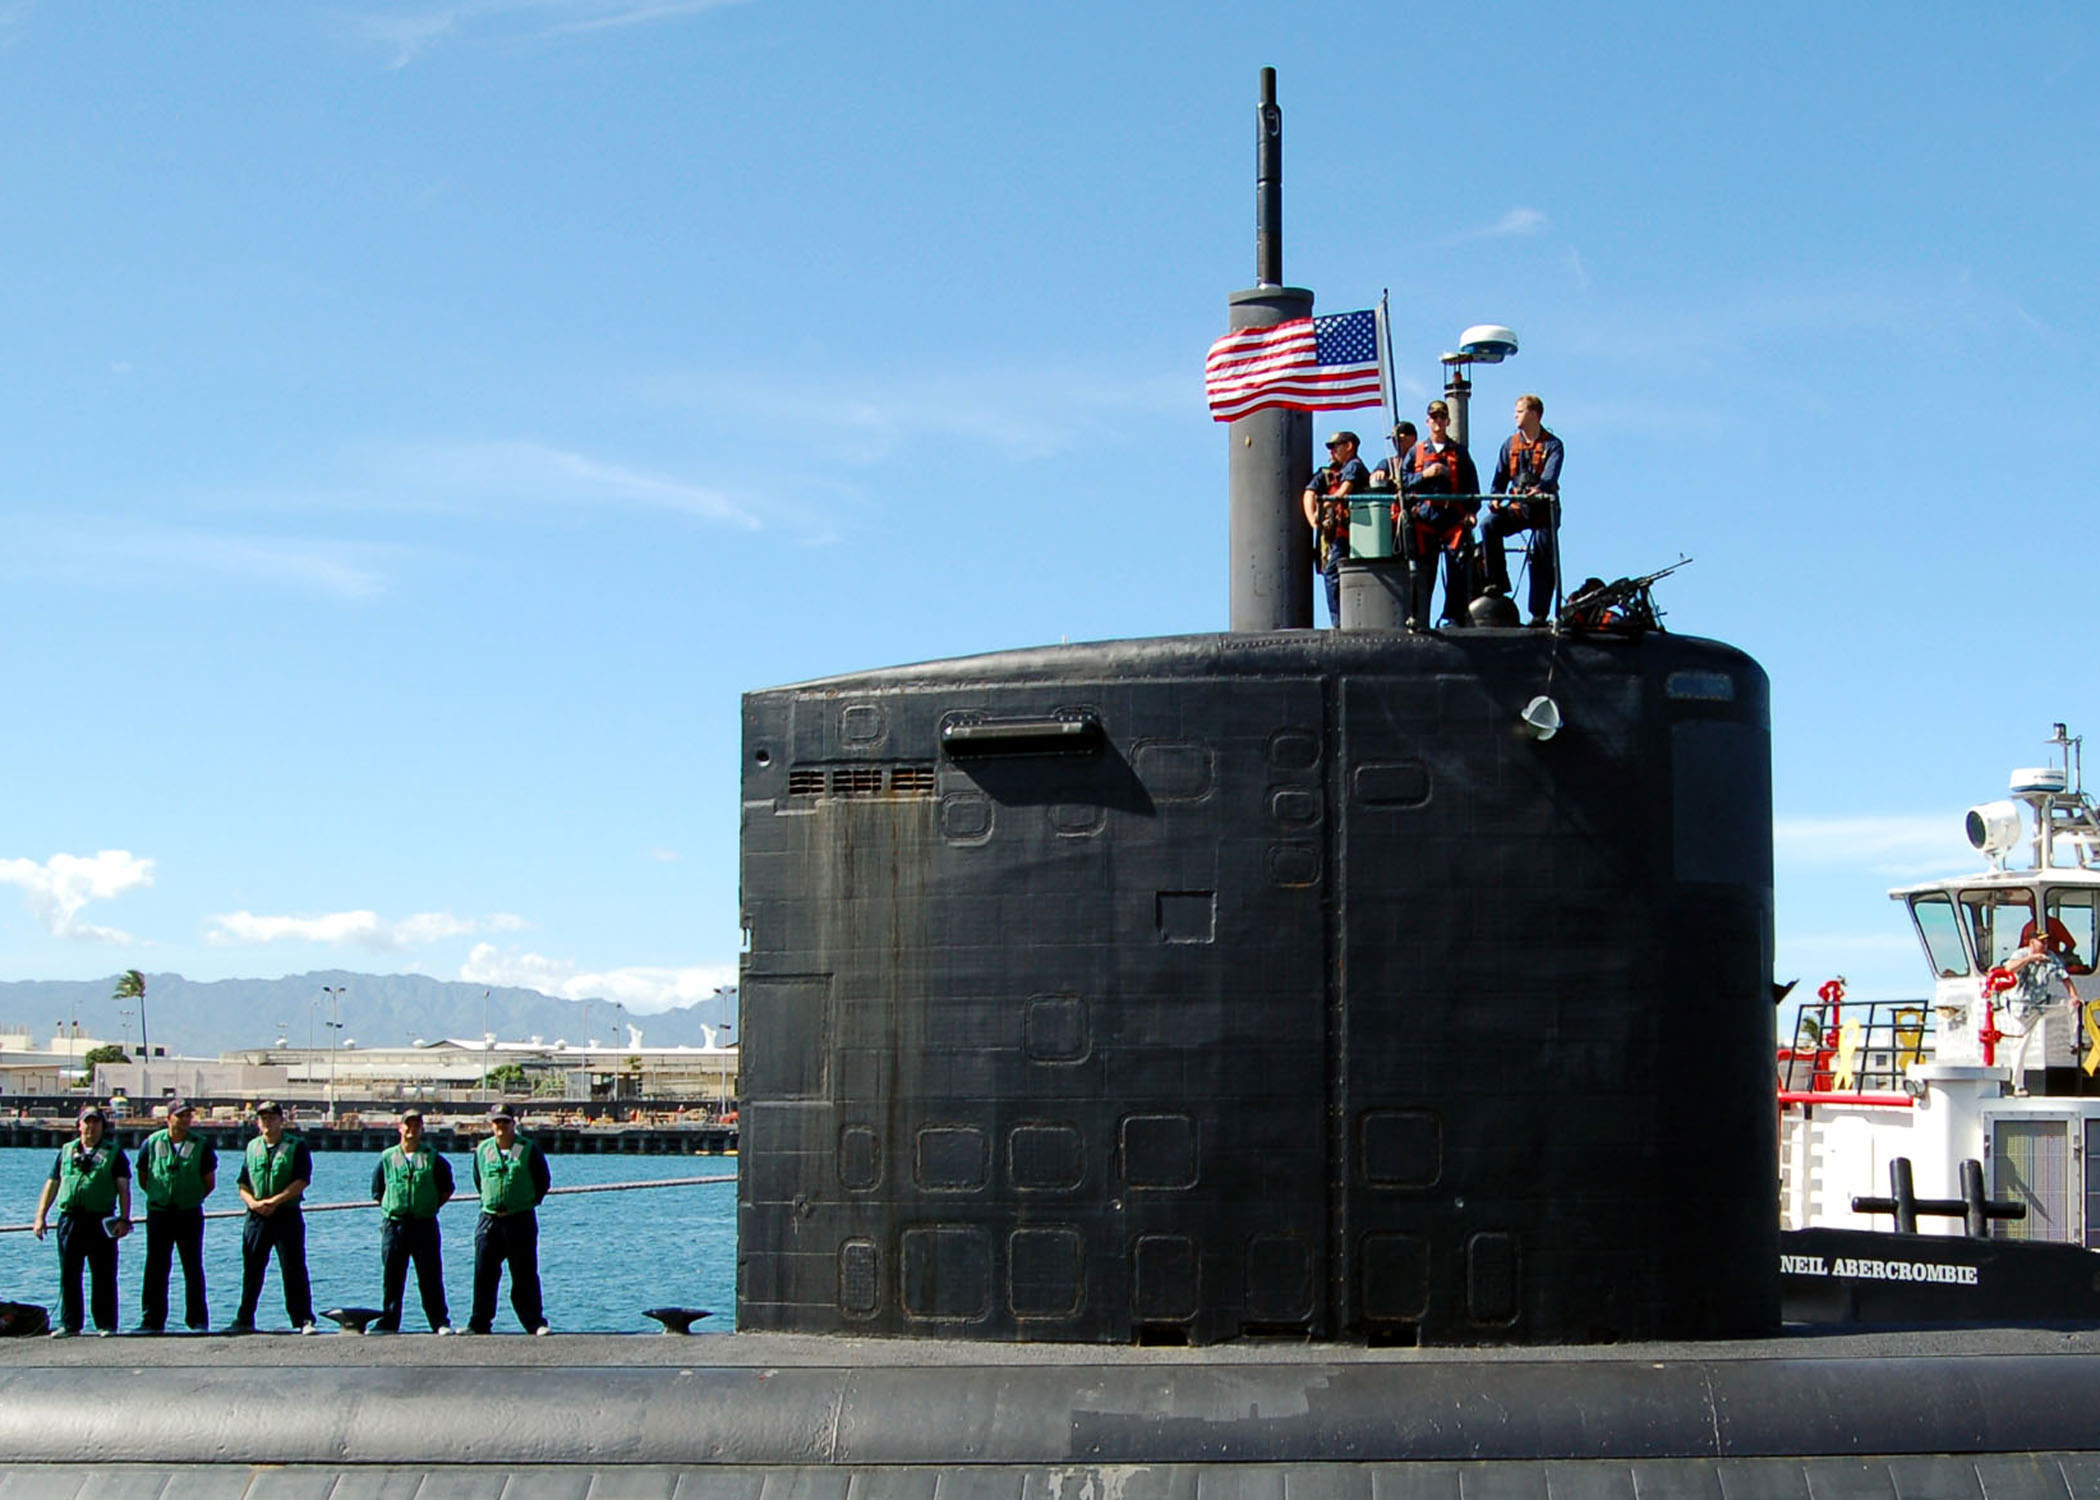 US Navy 051027-N-0879R-004 The Los Angeles-class fast attack submarine USS Charlotte (SSN 766) prepares to depart her homeport of Pearl Harbor